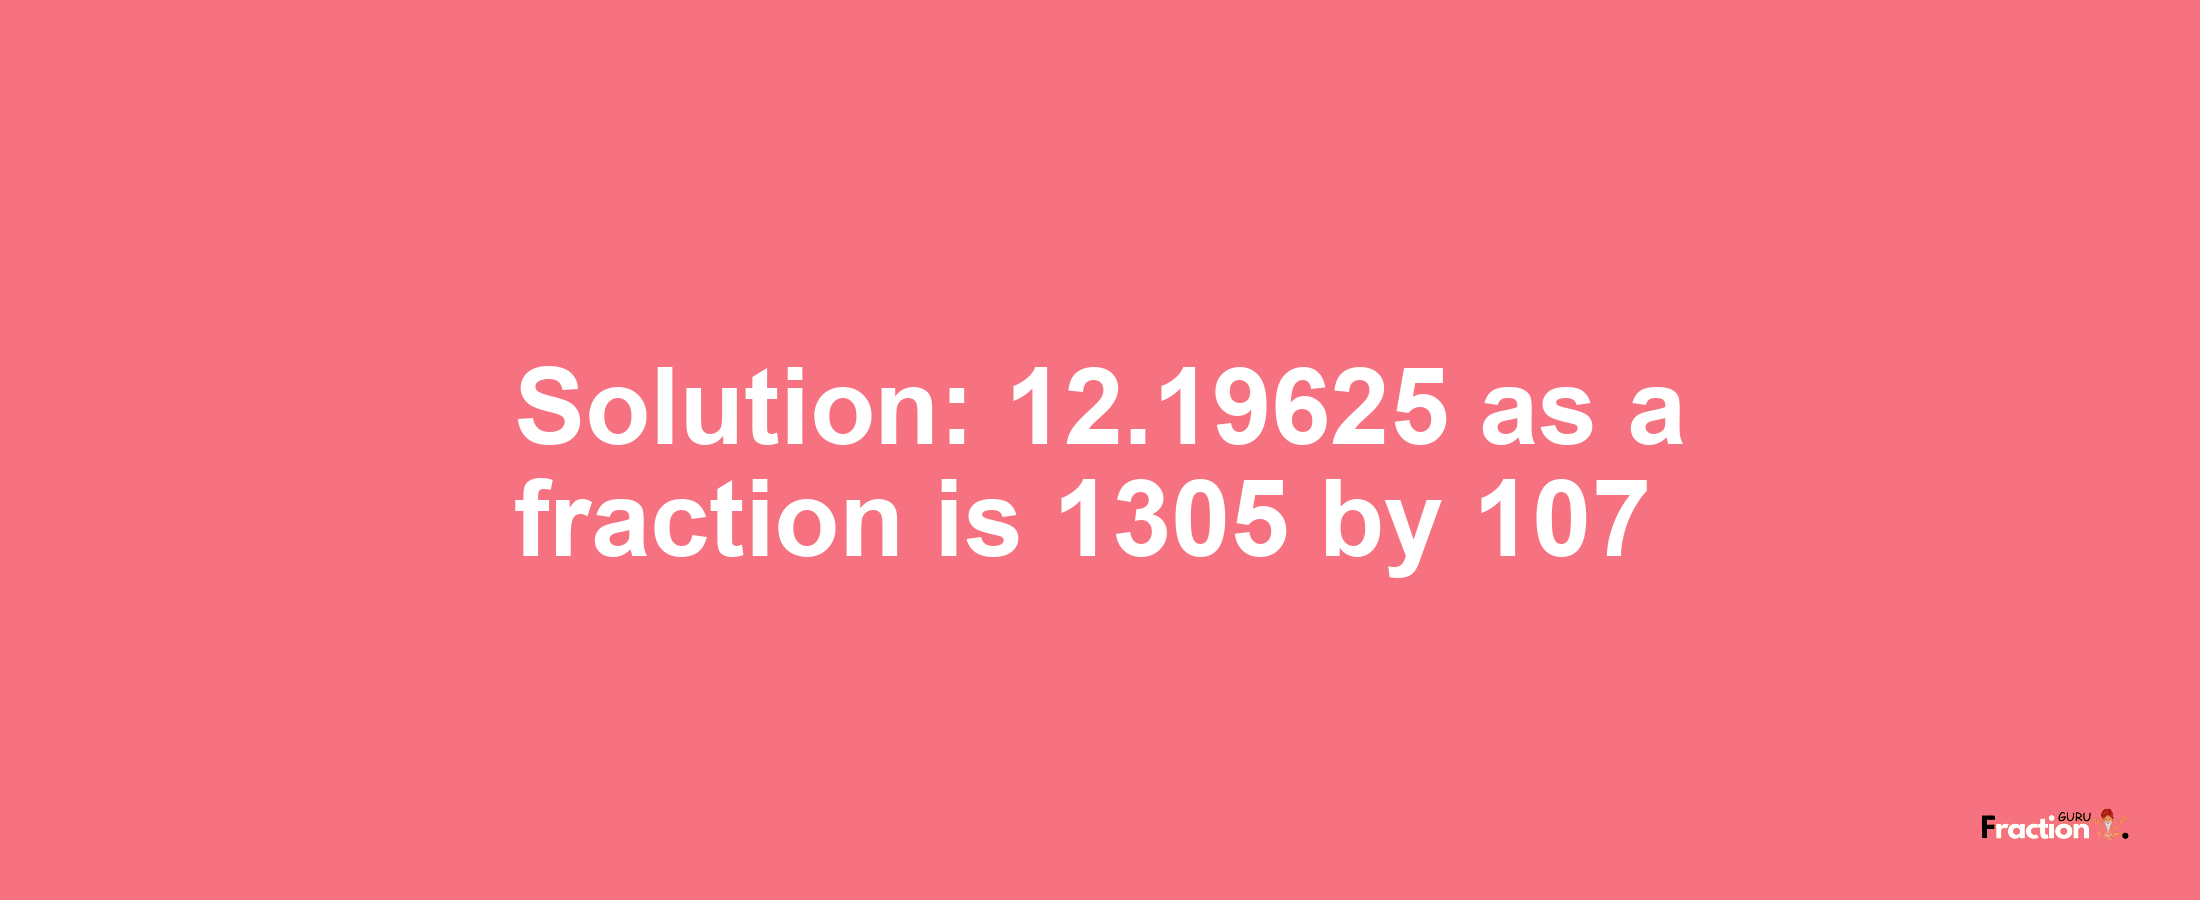 Solution:12.19625 as a fraction is 1305/107